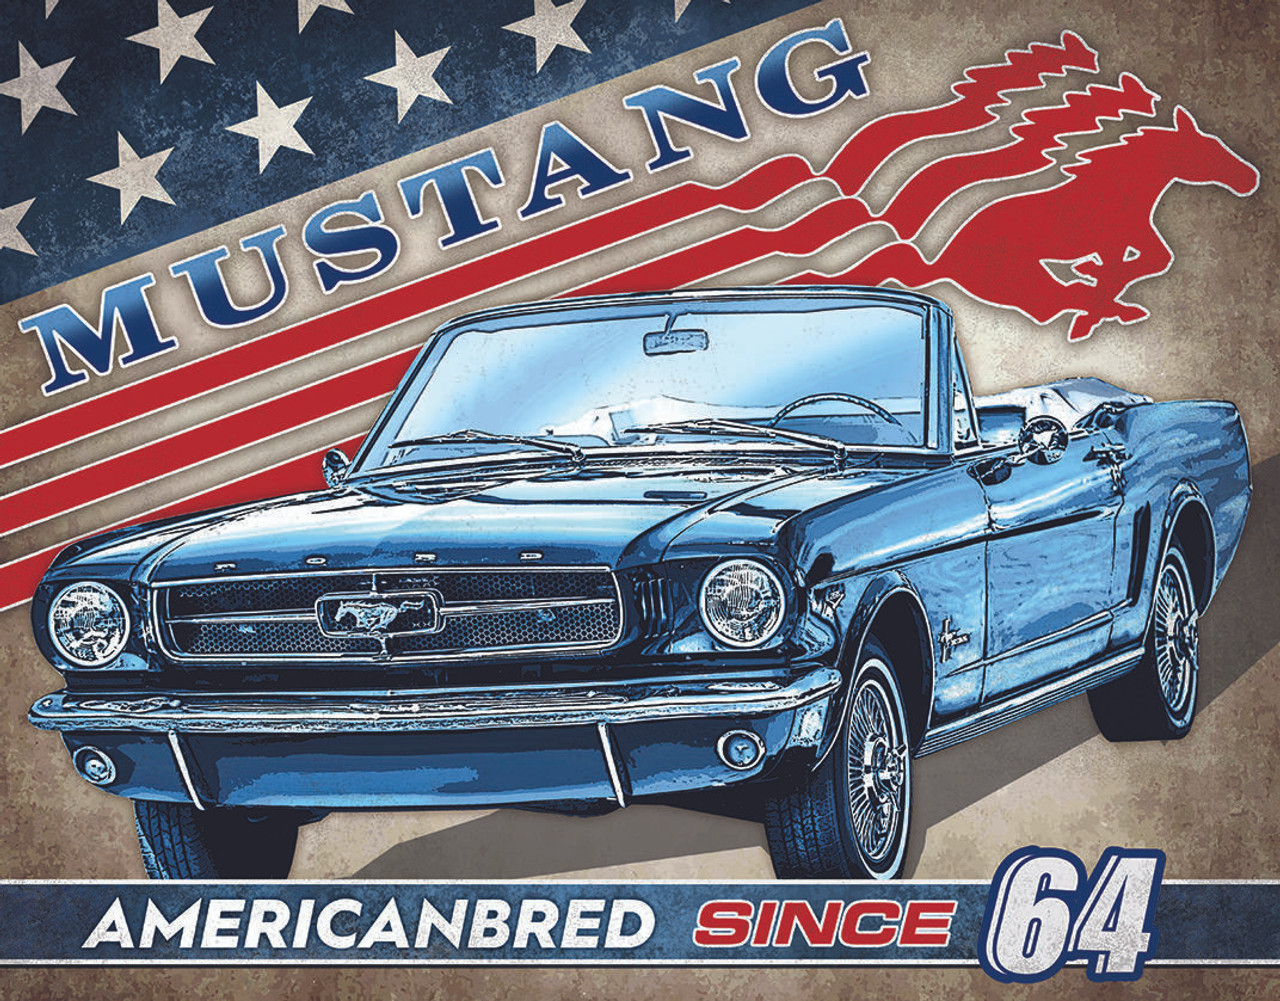 Ford Mustang American Bred since 1964